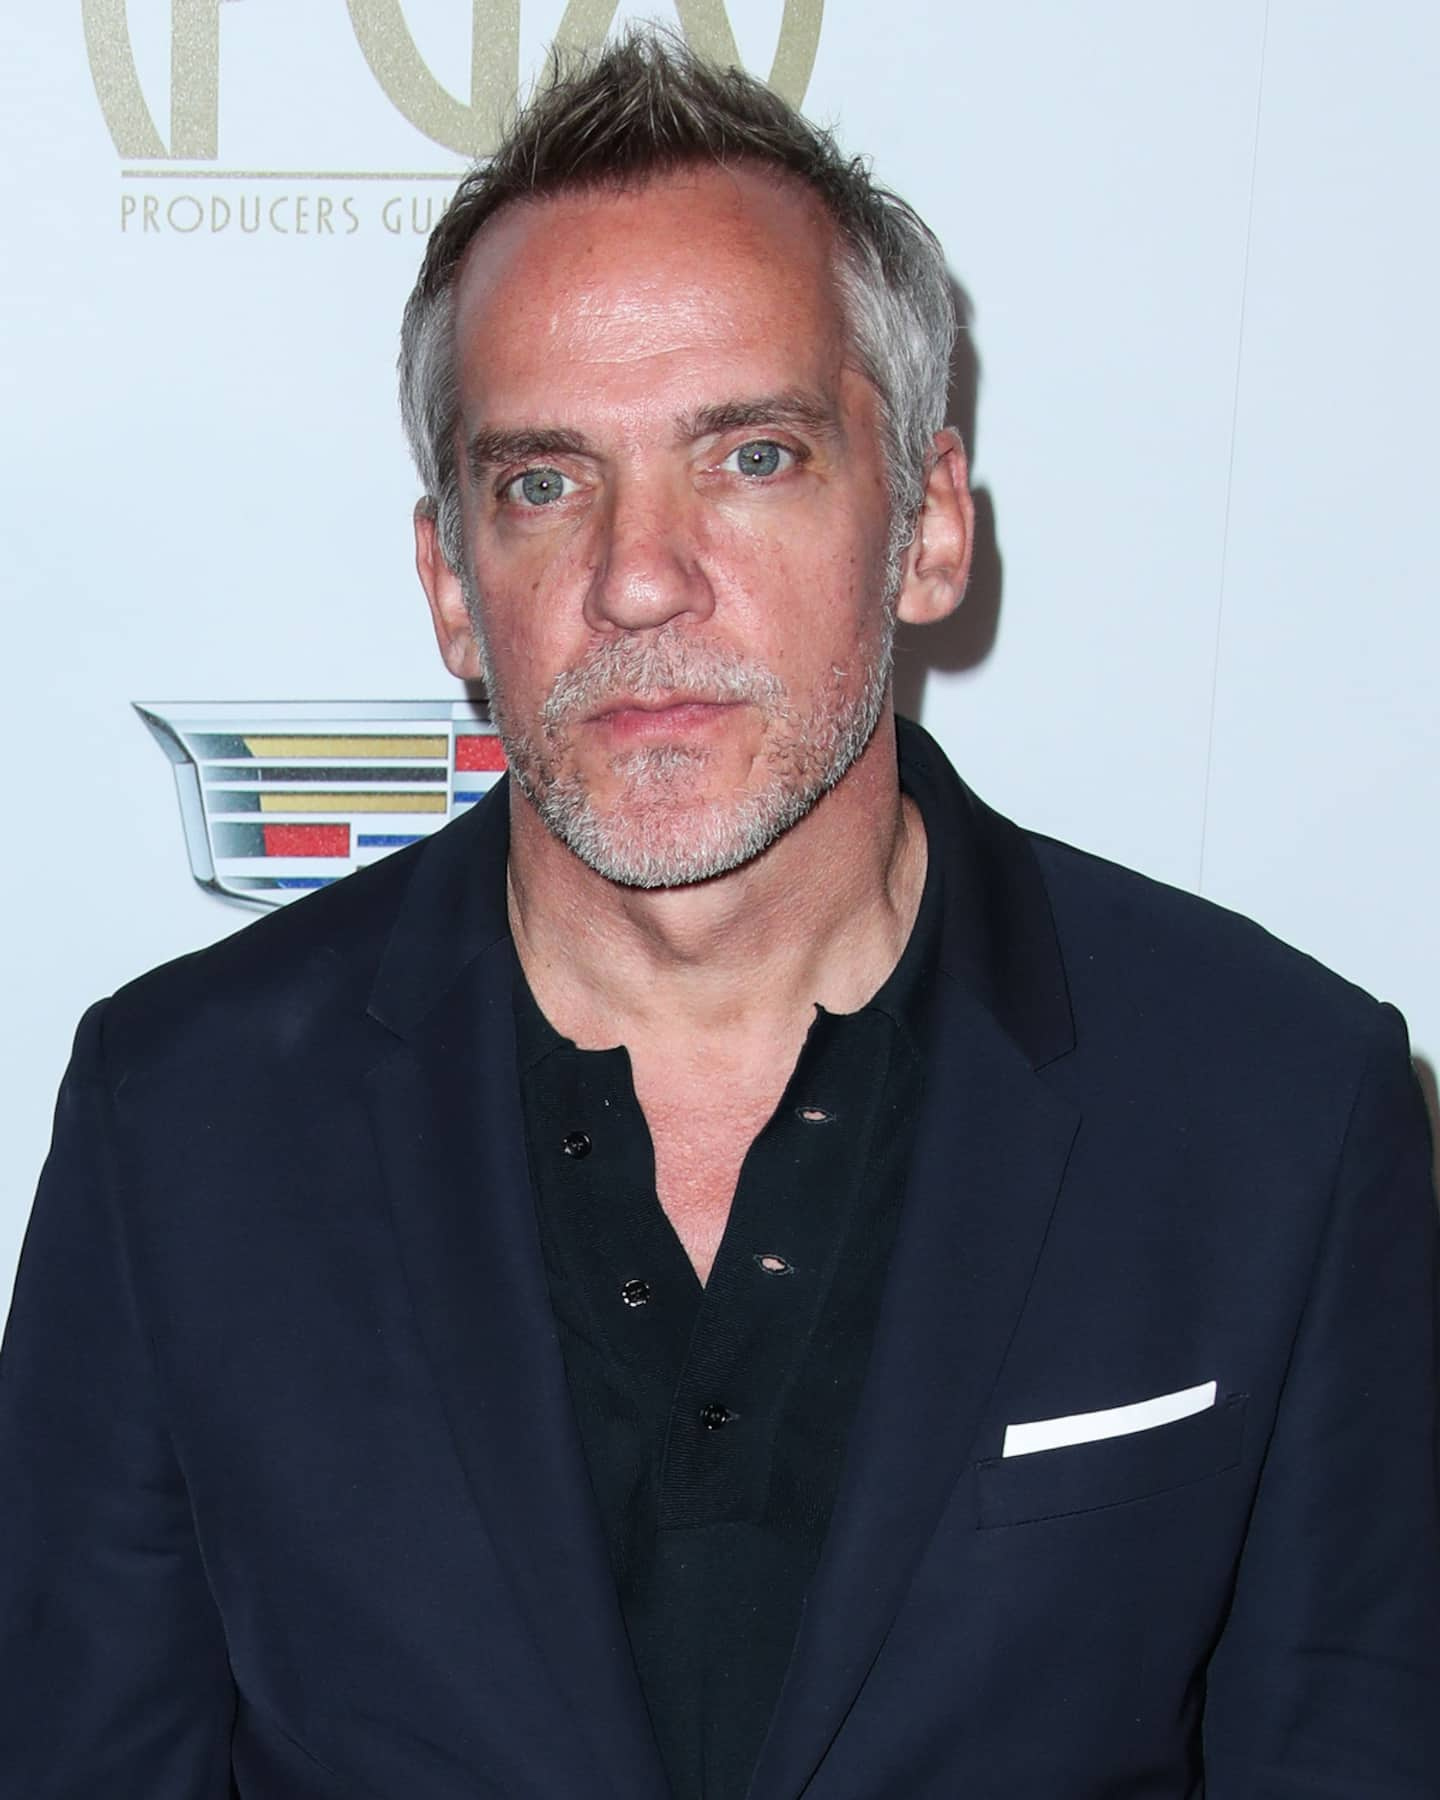 A year after his death, Jean-Marc Vallée's Hollywood friends and colleagues celebrate him